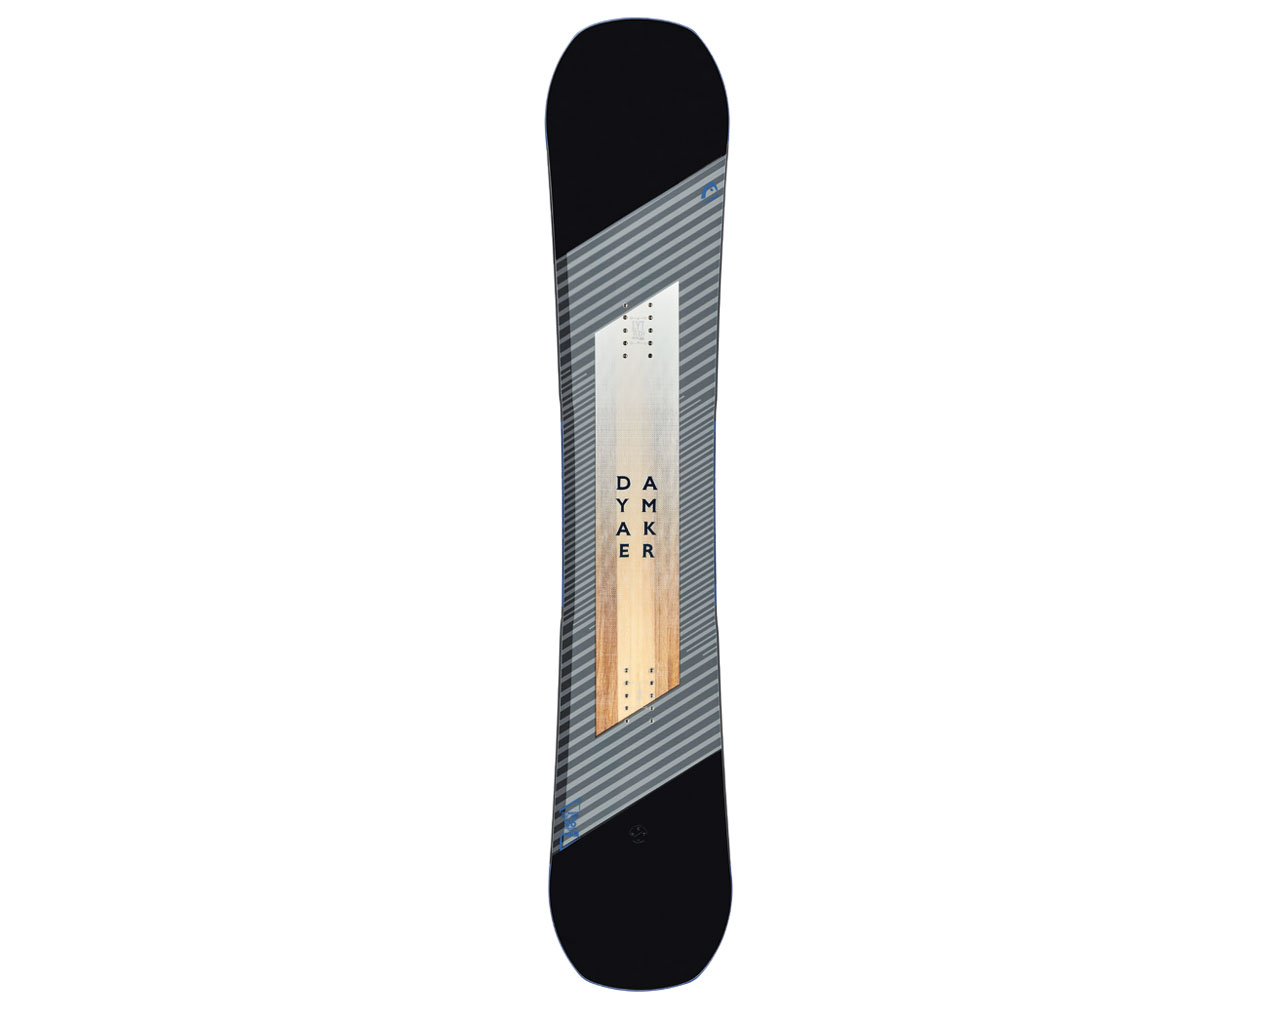 Head FW20/21 Snowboard Preview